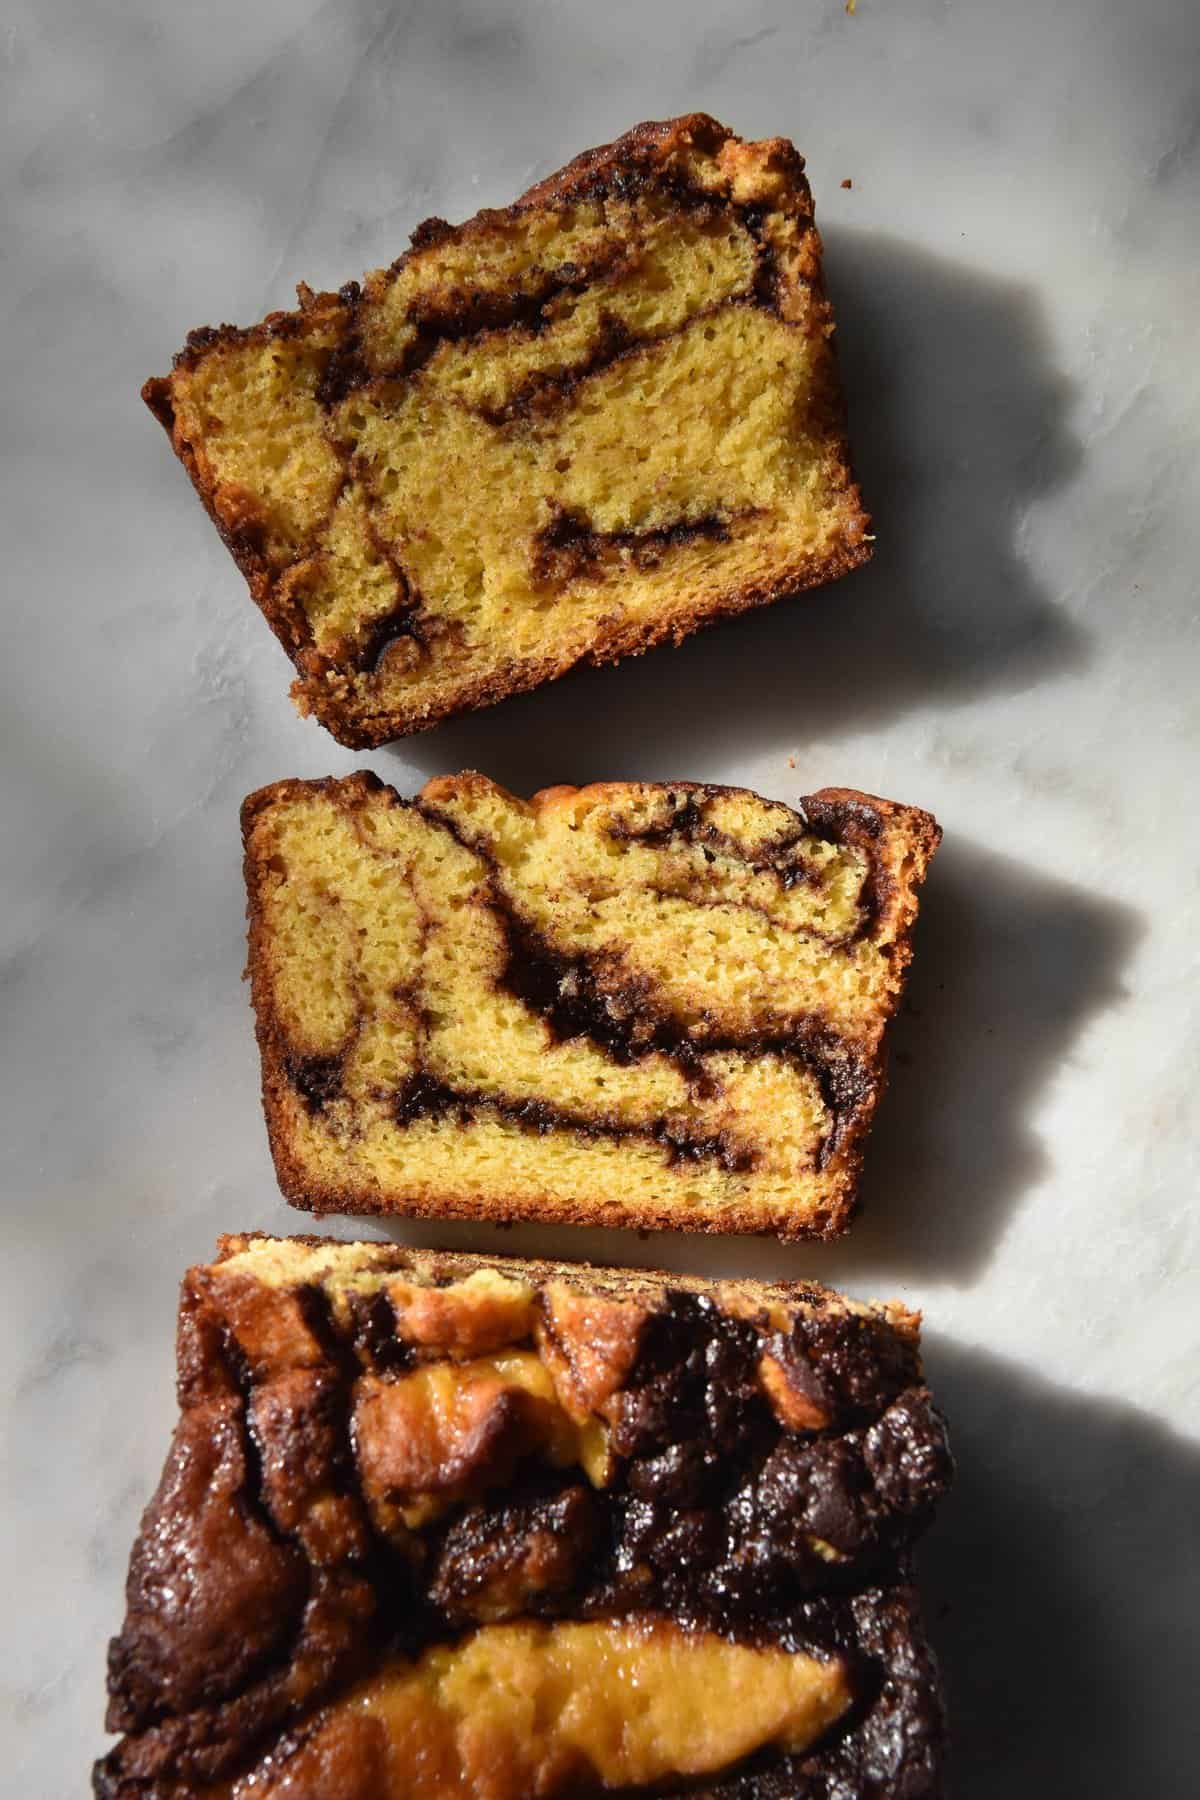 An aerial view of a gluten free, FODMAP friendly loaf of chocolate babka. The babka sits atop a white marble table and two slices face upwards to reveal the marbled chocolate innards